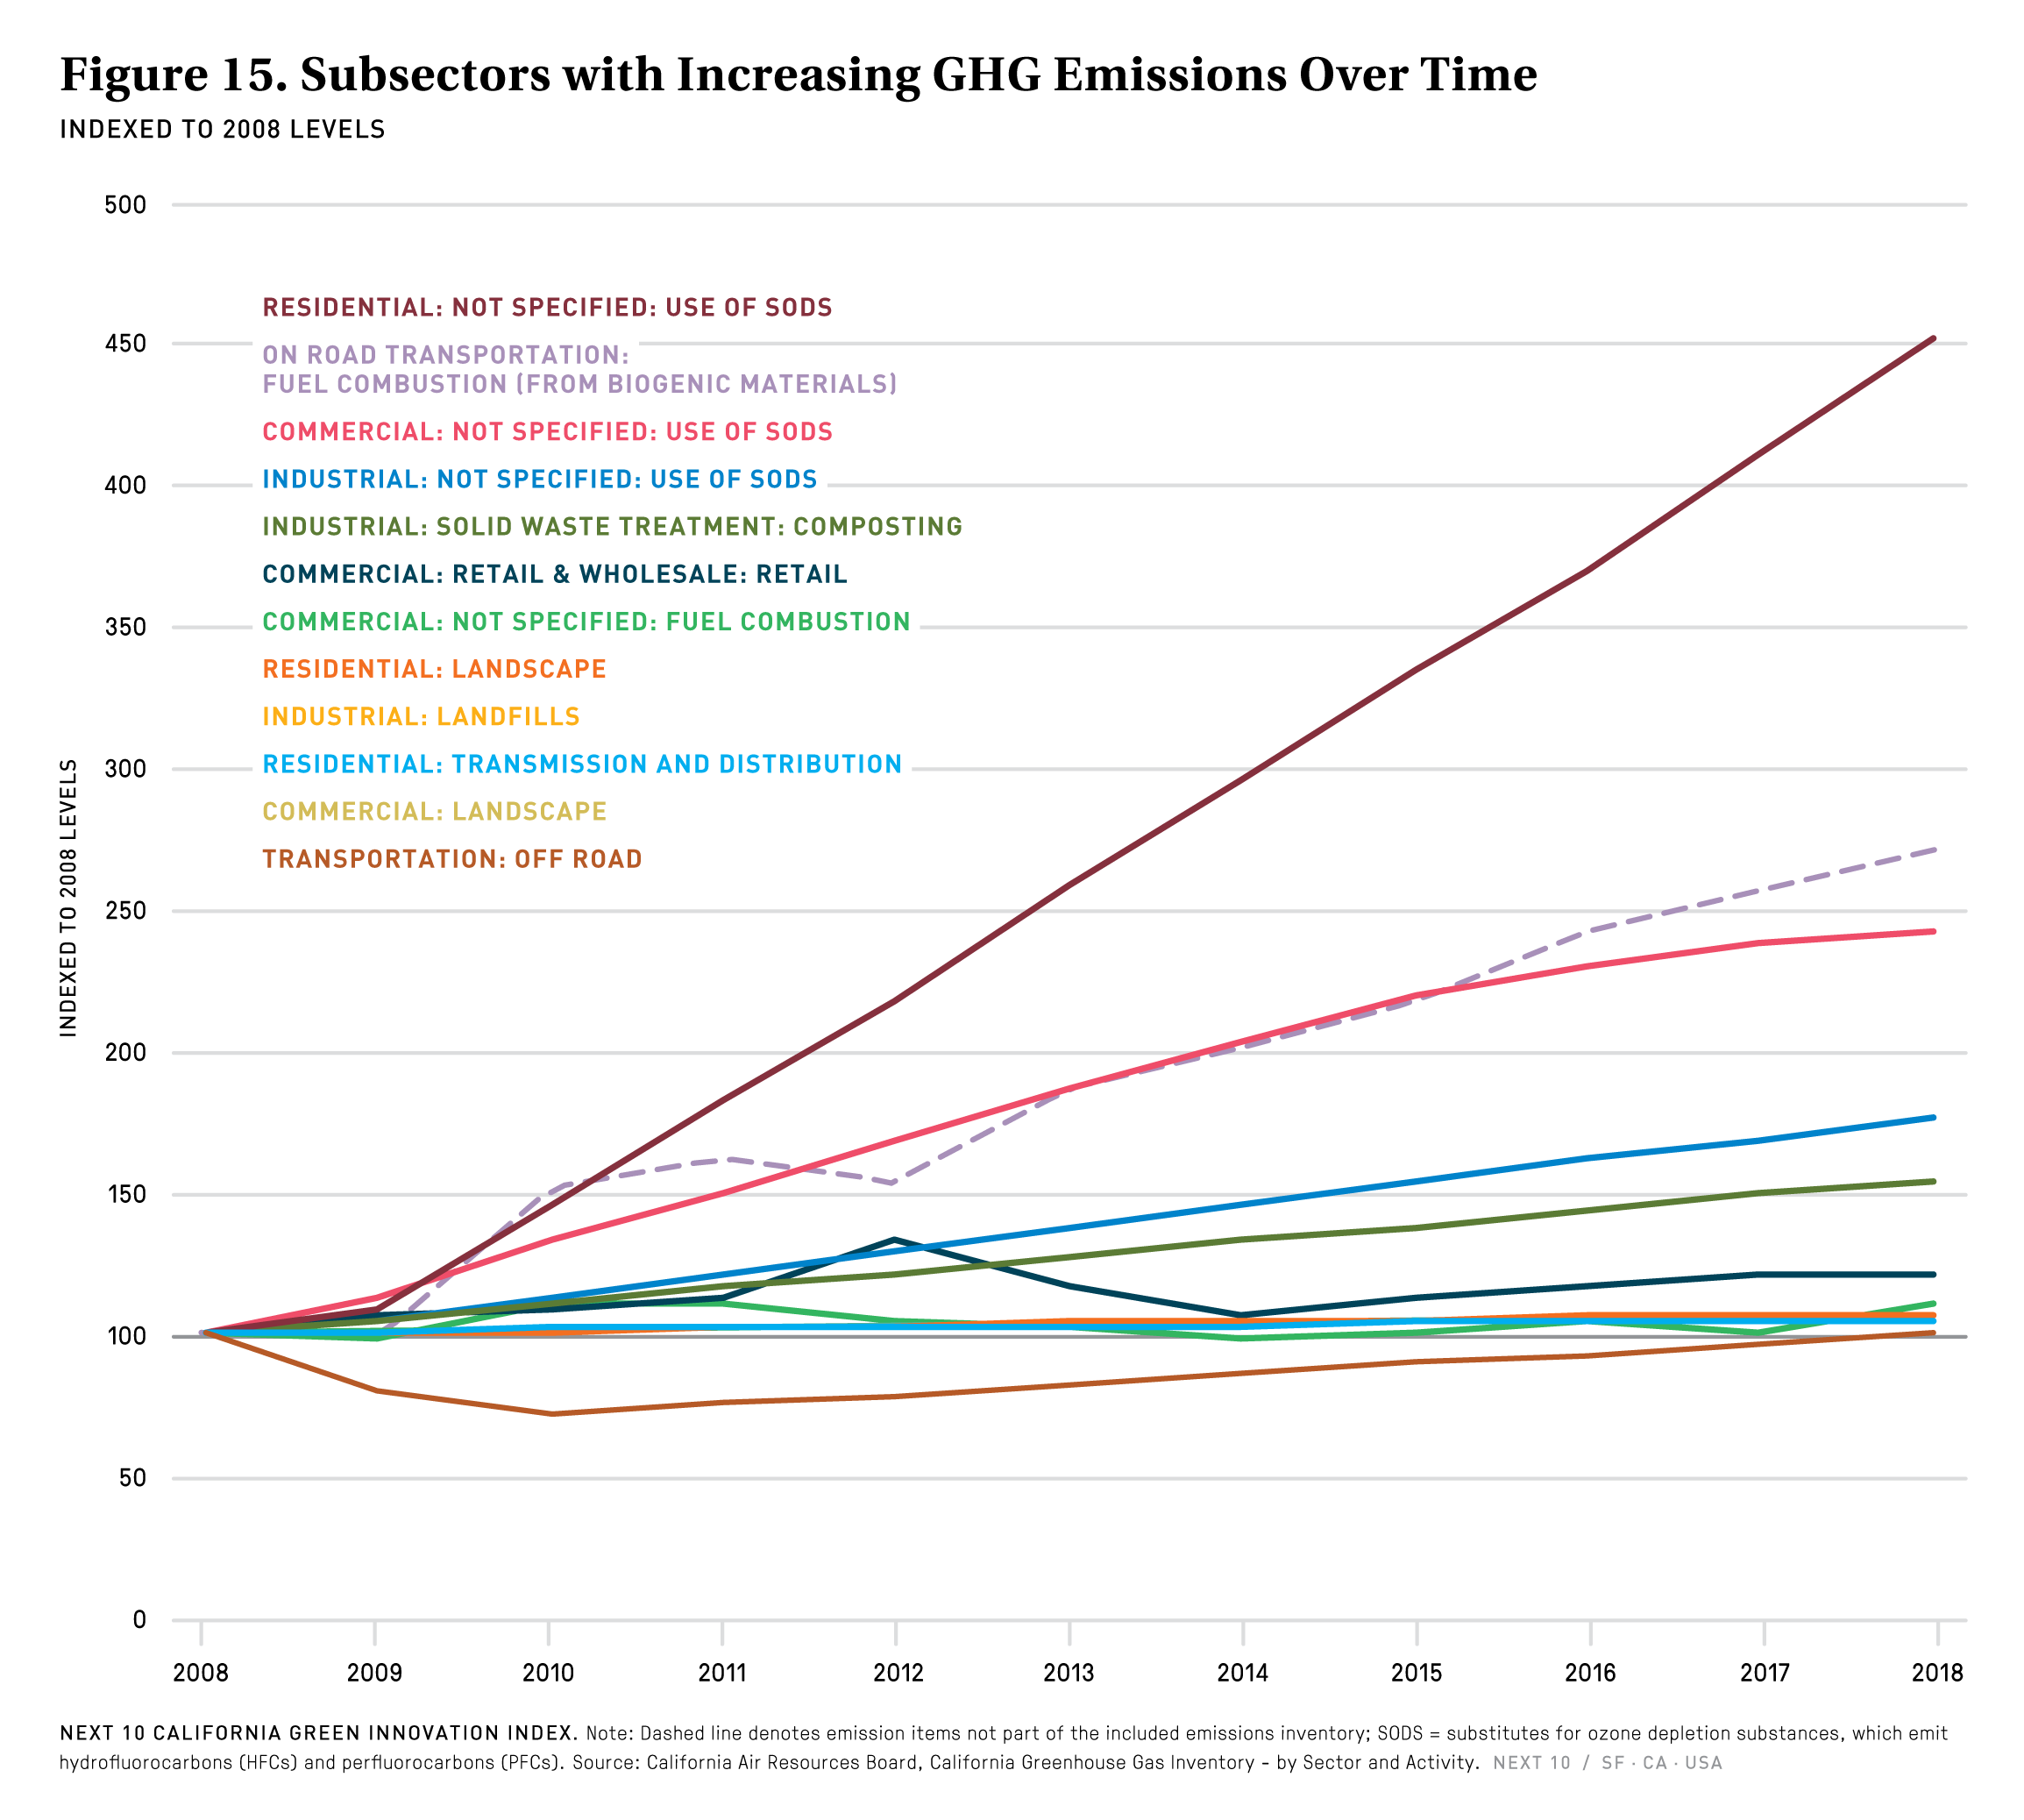 Figure 15. Subsectors with Increasing GHG Emissions Over Time